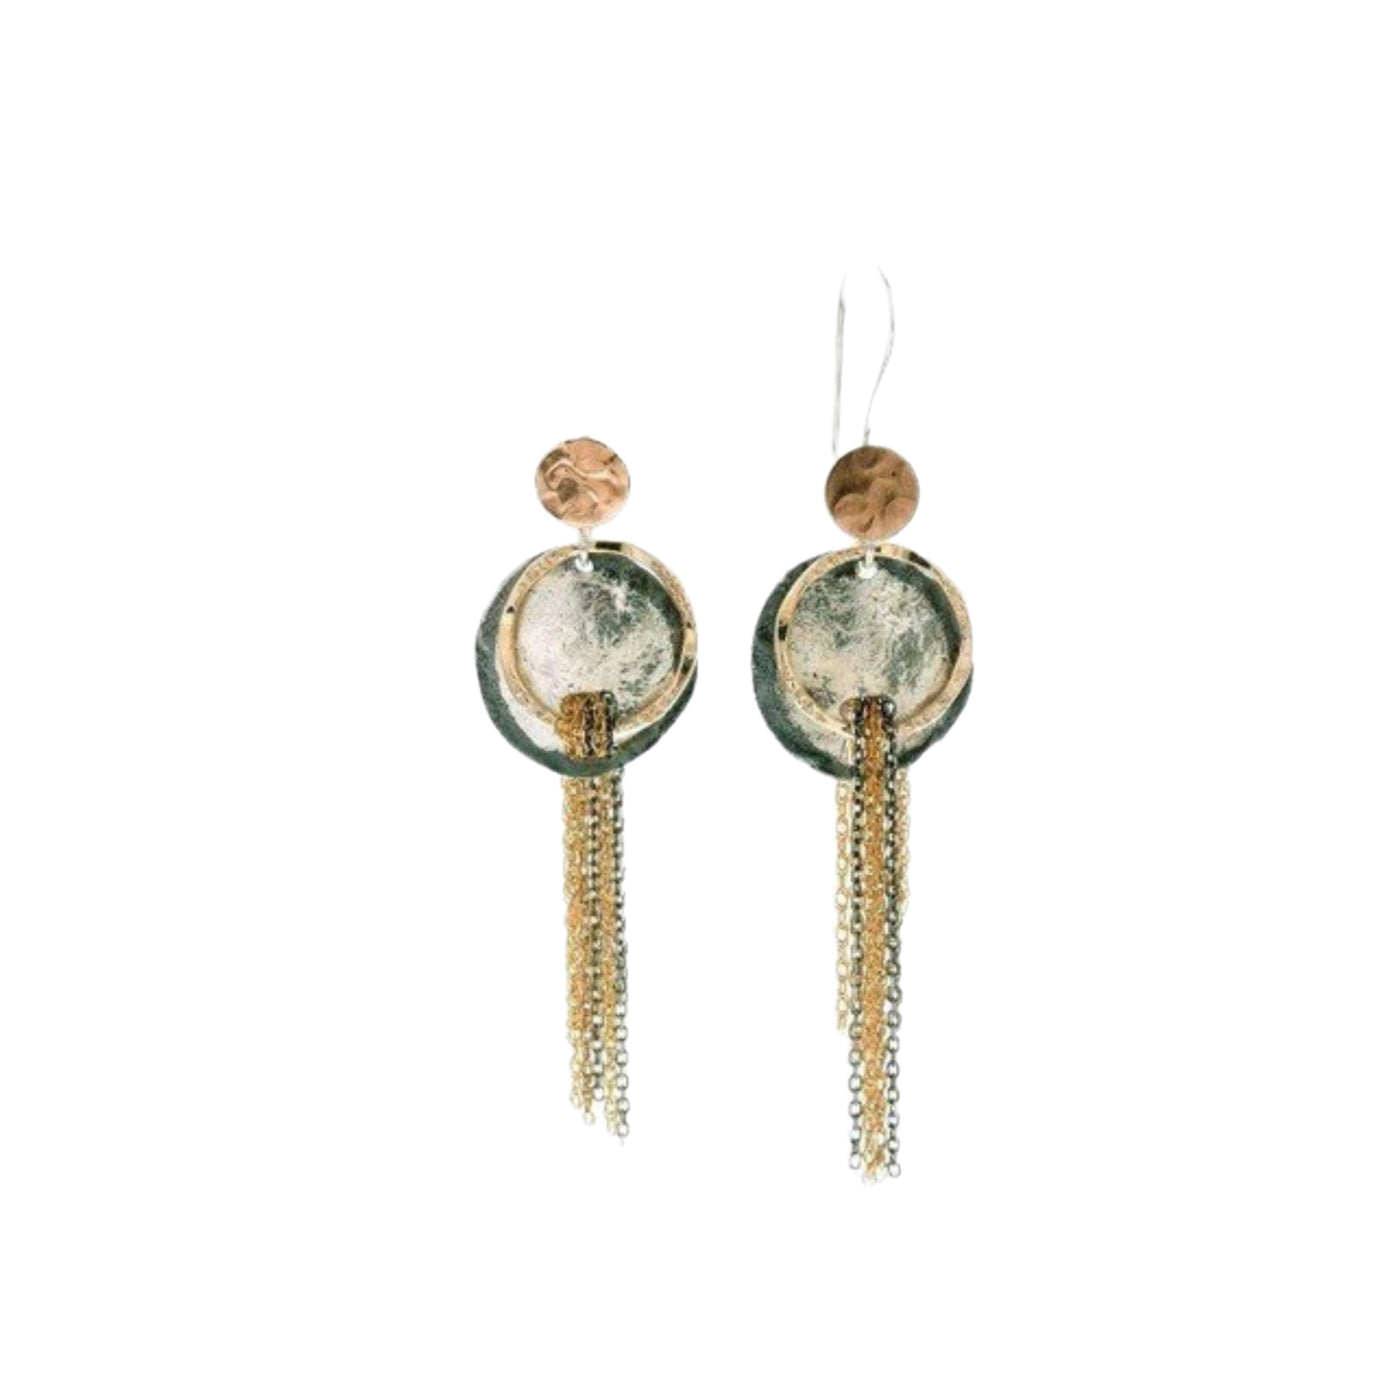 Sterling silver and gold filled handcrafted Israeli drop earrings